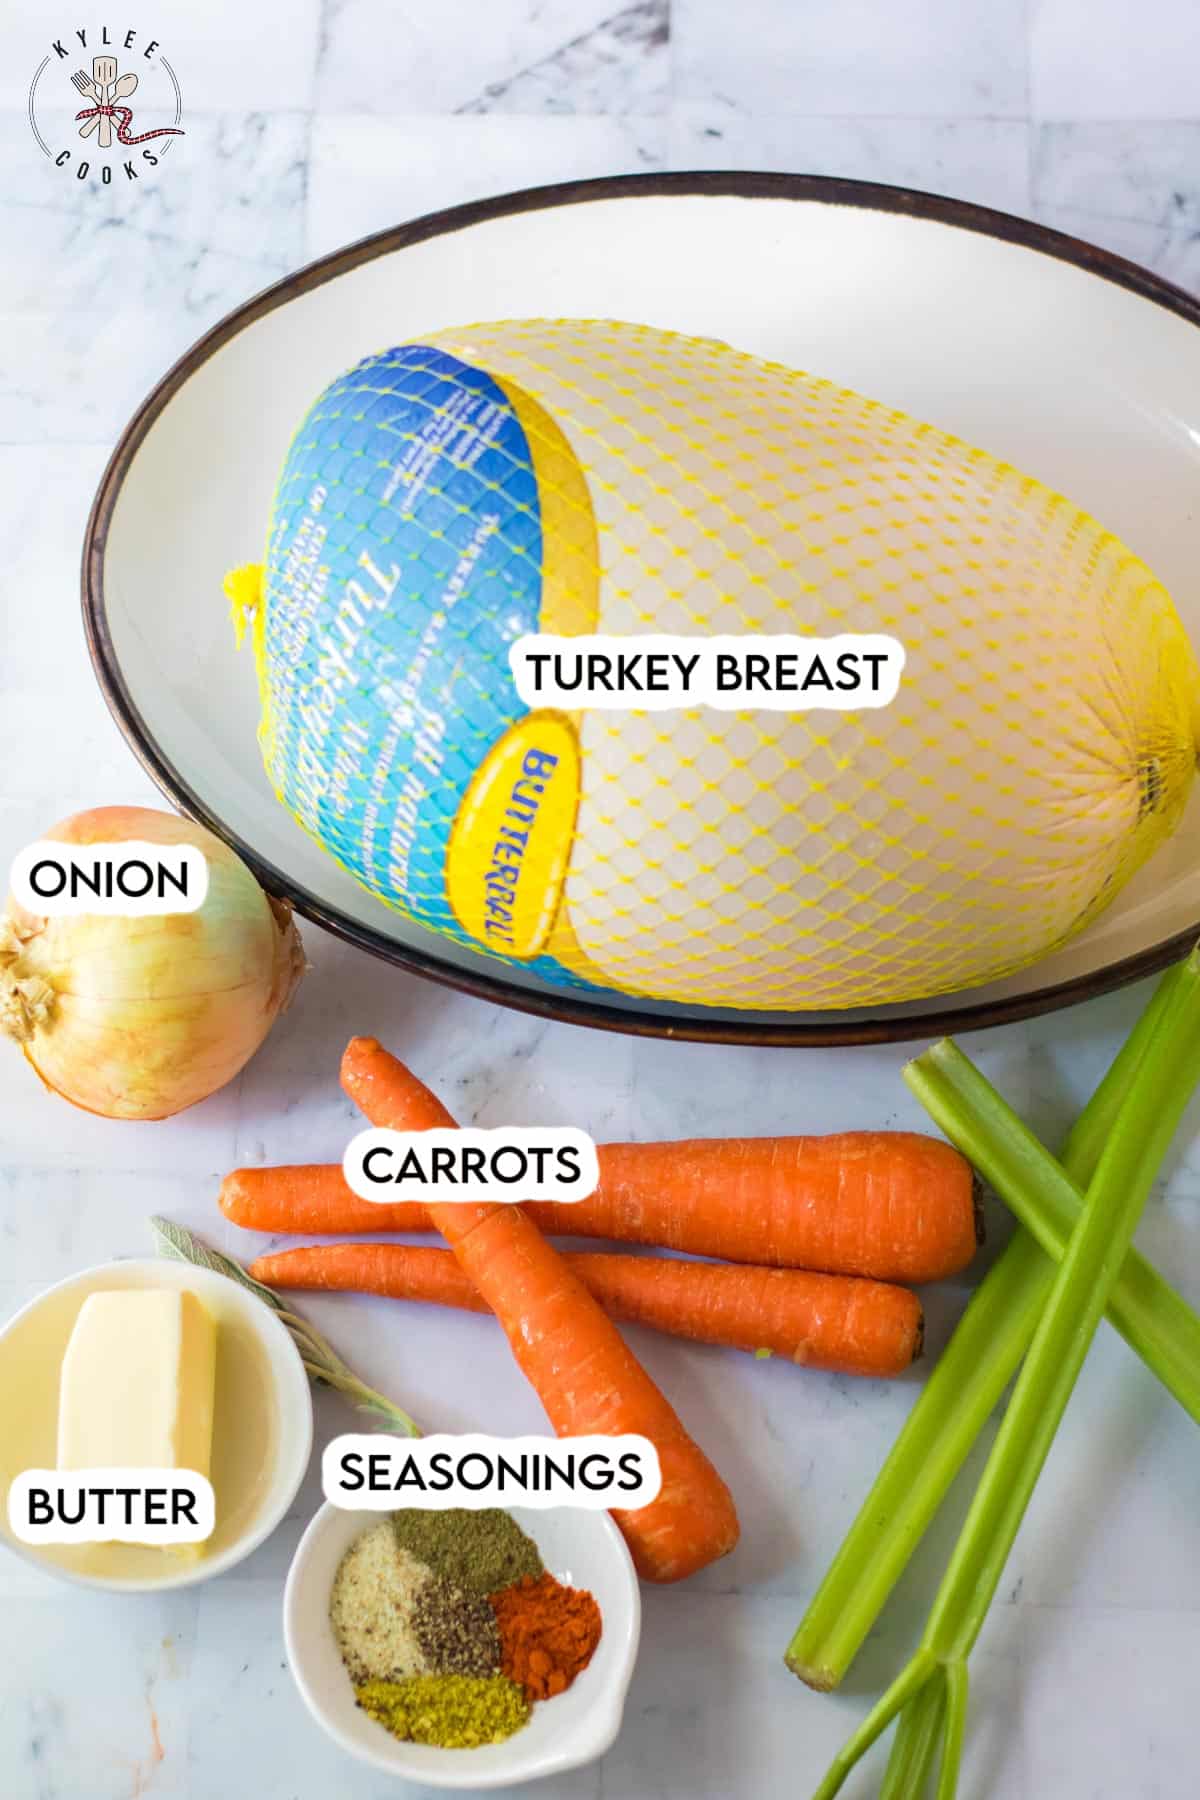 ingredients to make a crockpot turkey breast laid out and labeled.